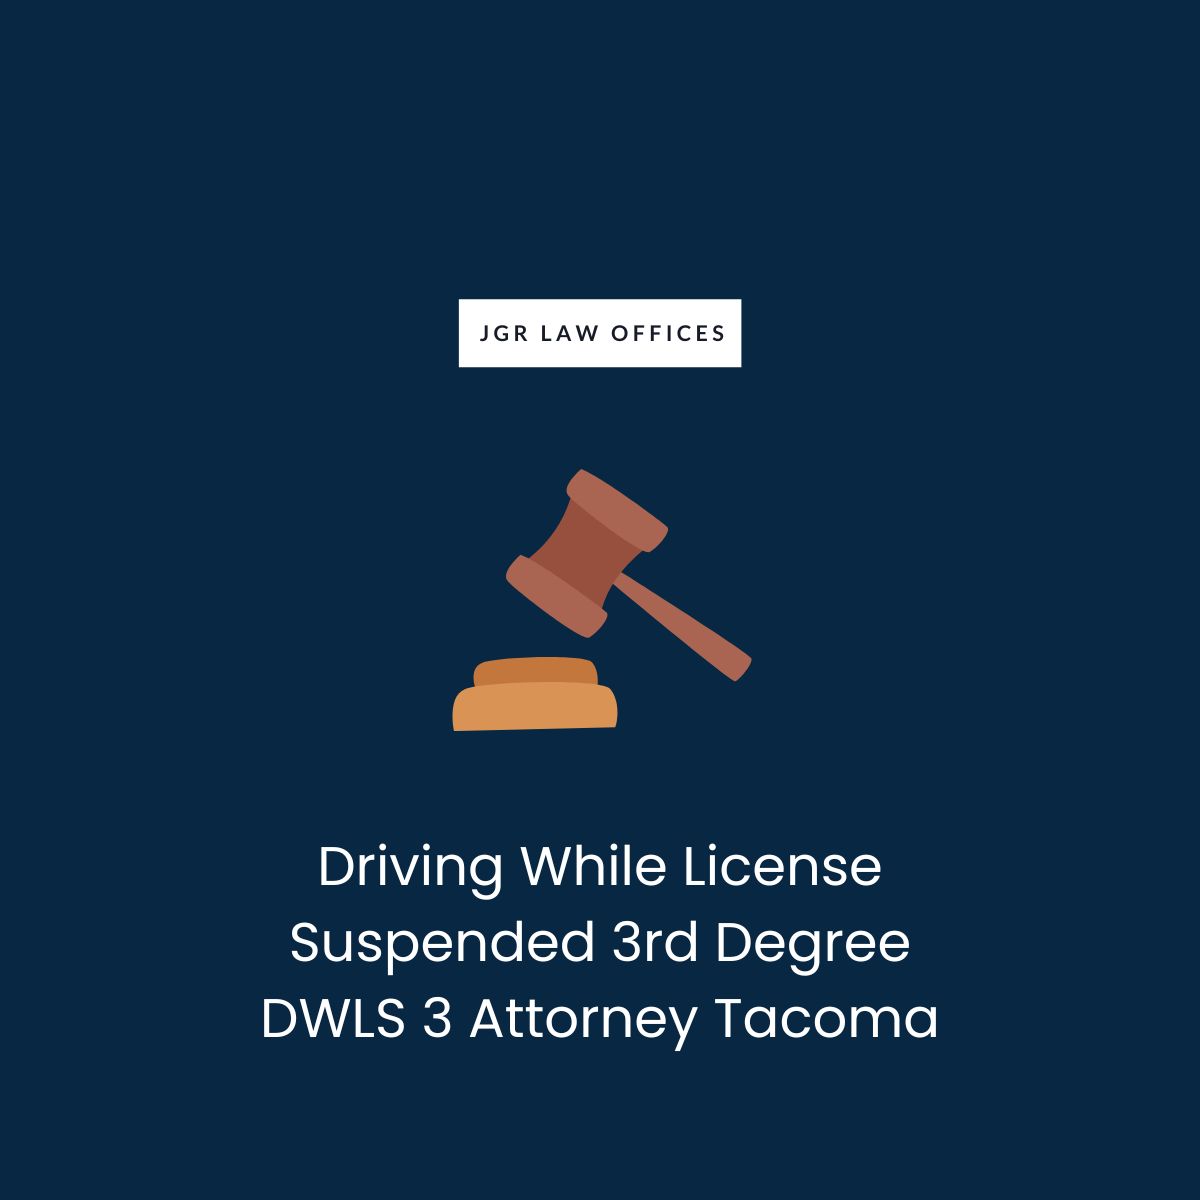 Driving While License Suspended 3rd Degree DWLS 3 Attorney Tacoma